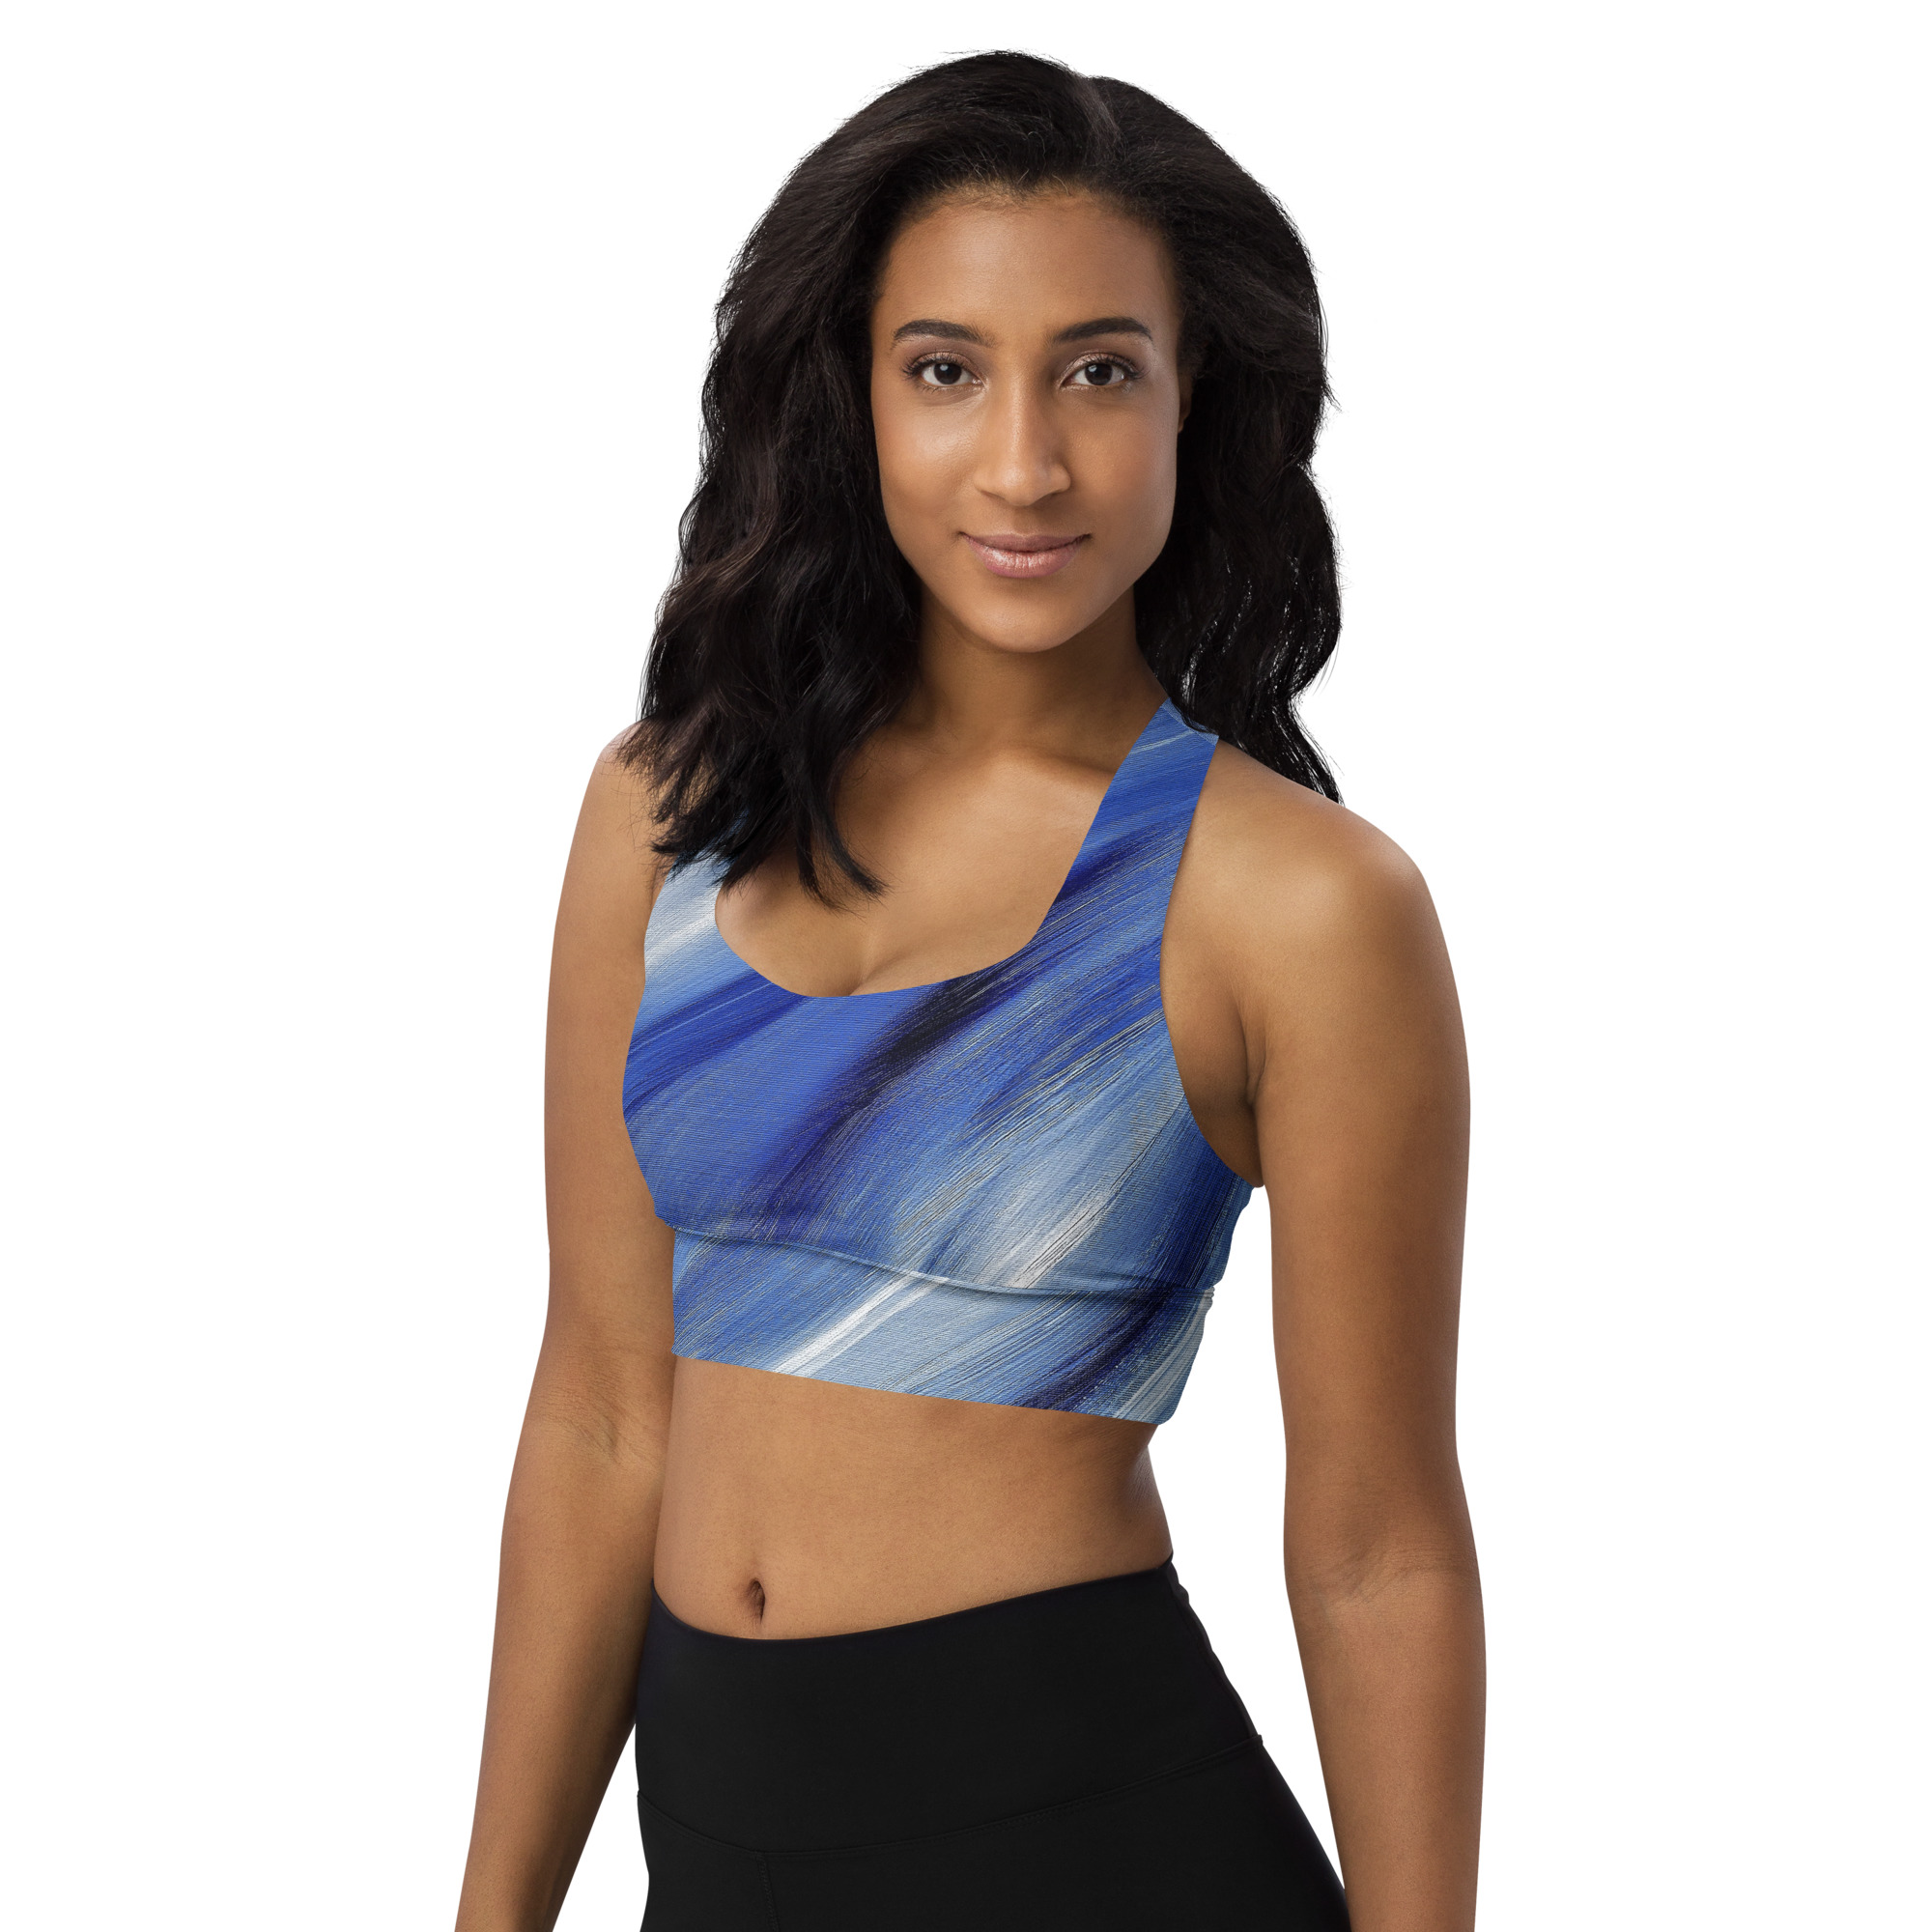 Uplifting Sports Bra in Blue Wave Colours - Medium to High Support